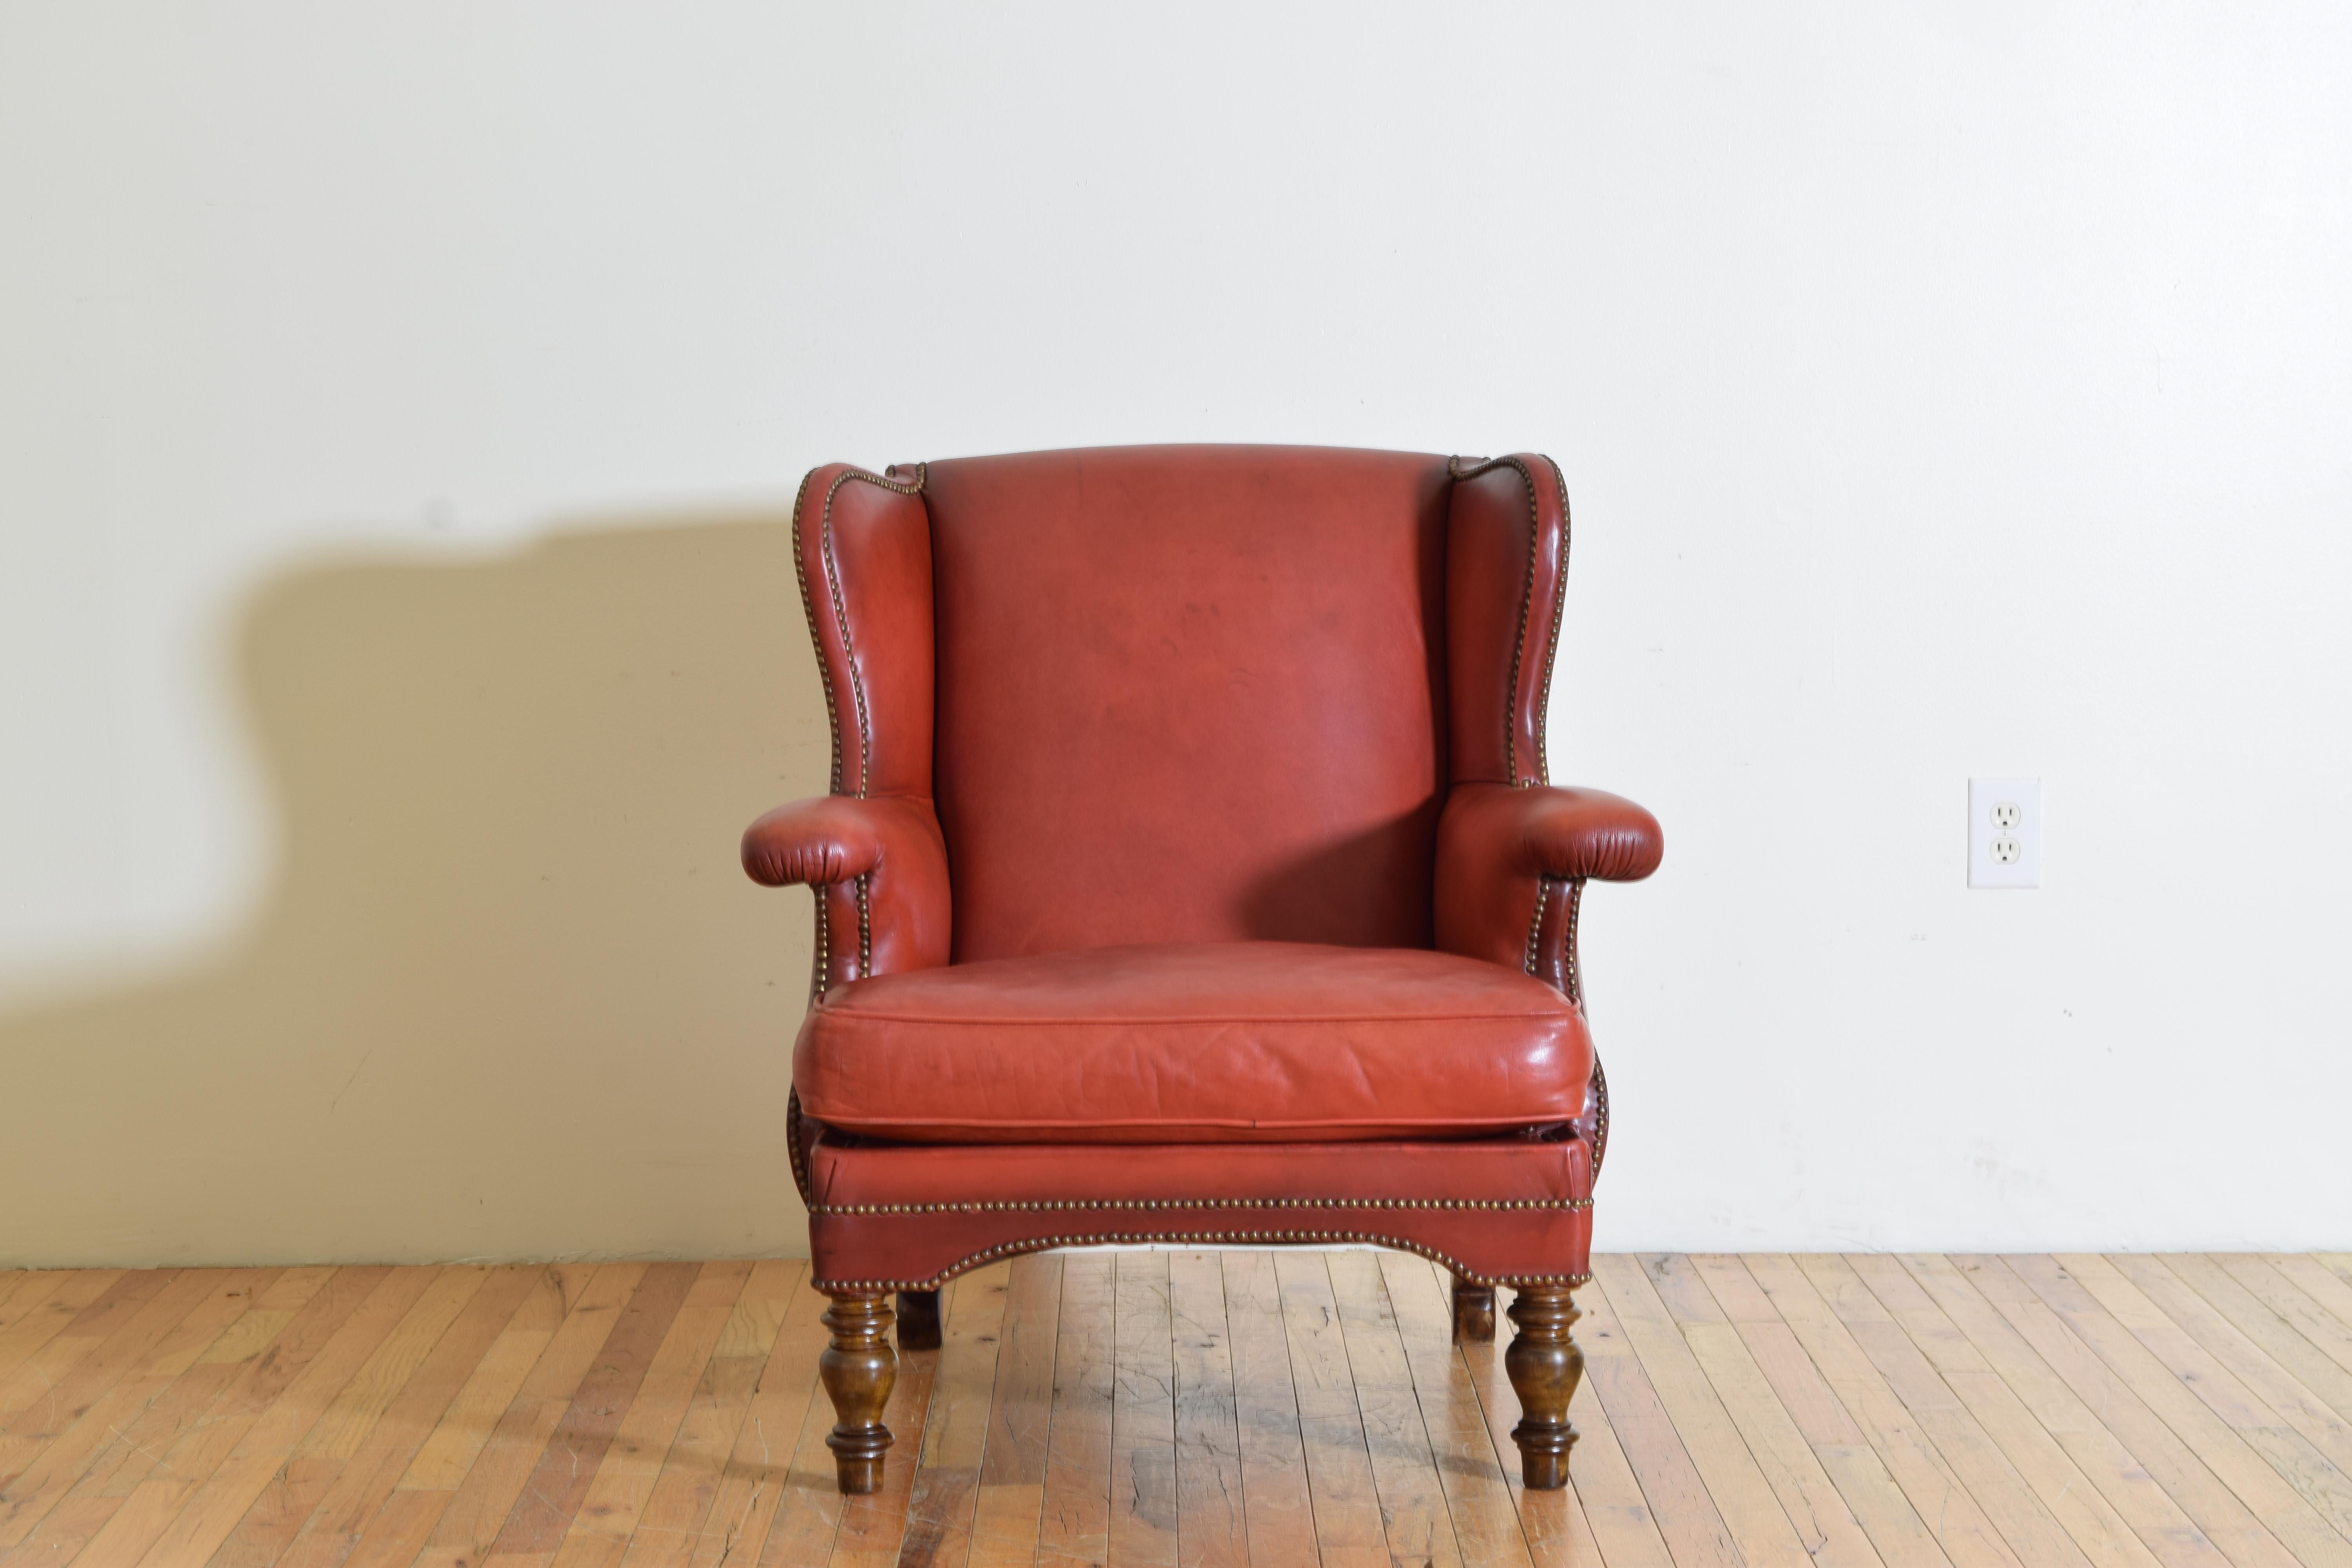 20th Century Italian Walnut and Leather Upholstered Wingchair, mid 20th century